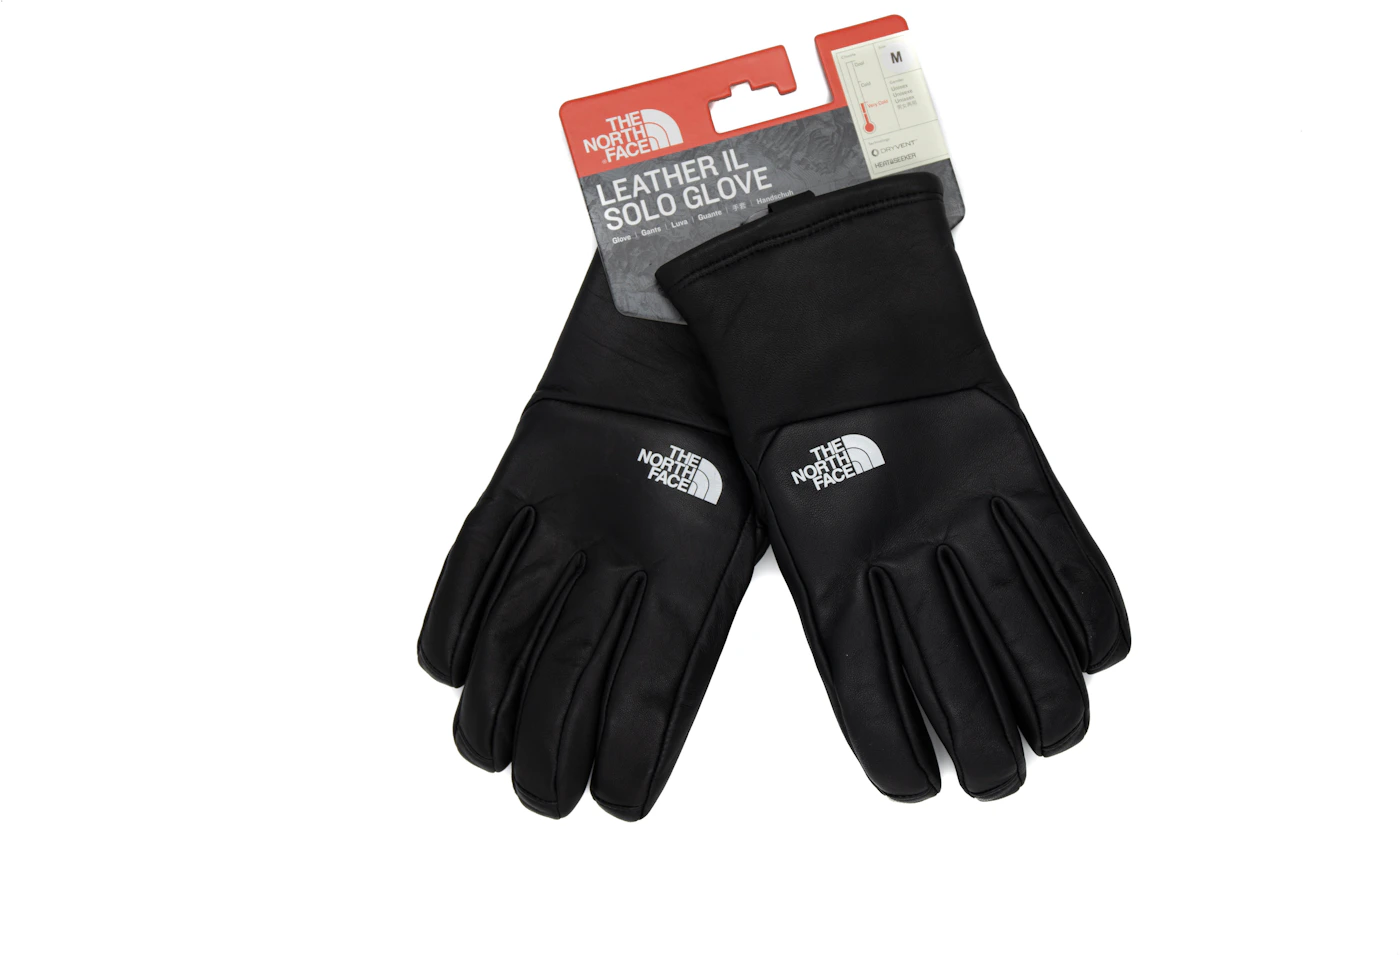 Supreme The North Face Leather Gloves Black - FW17 - US